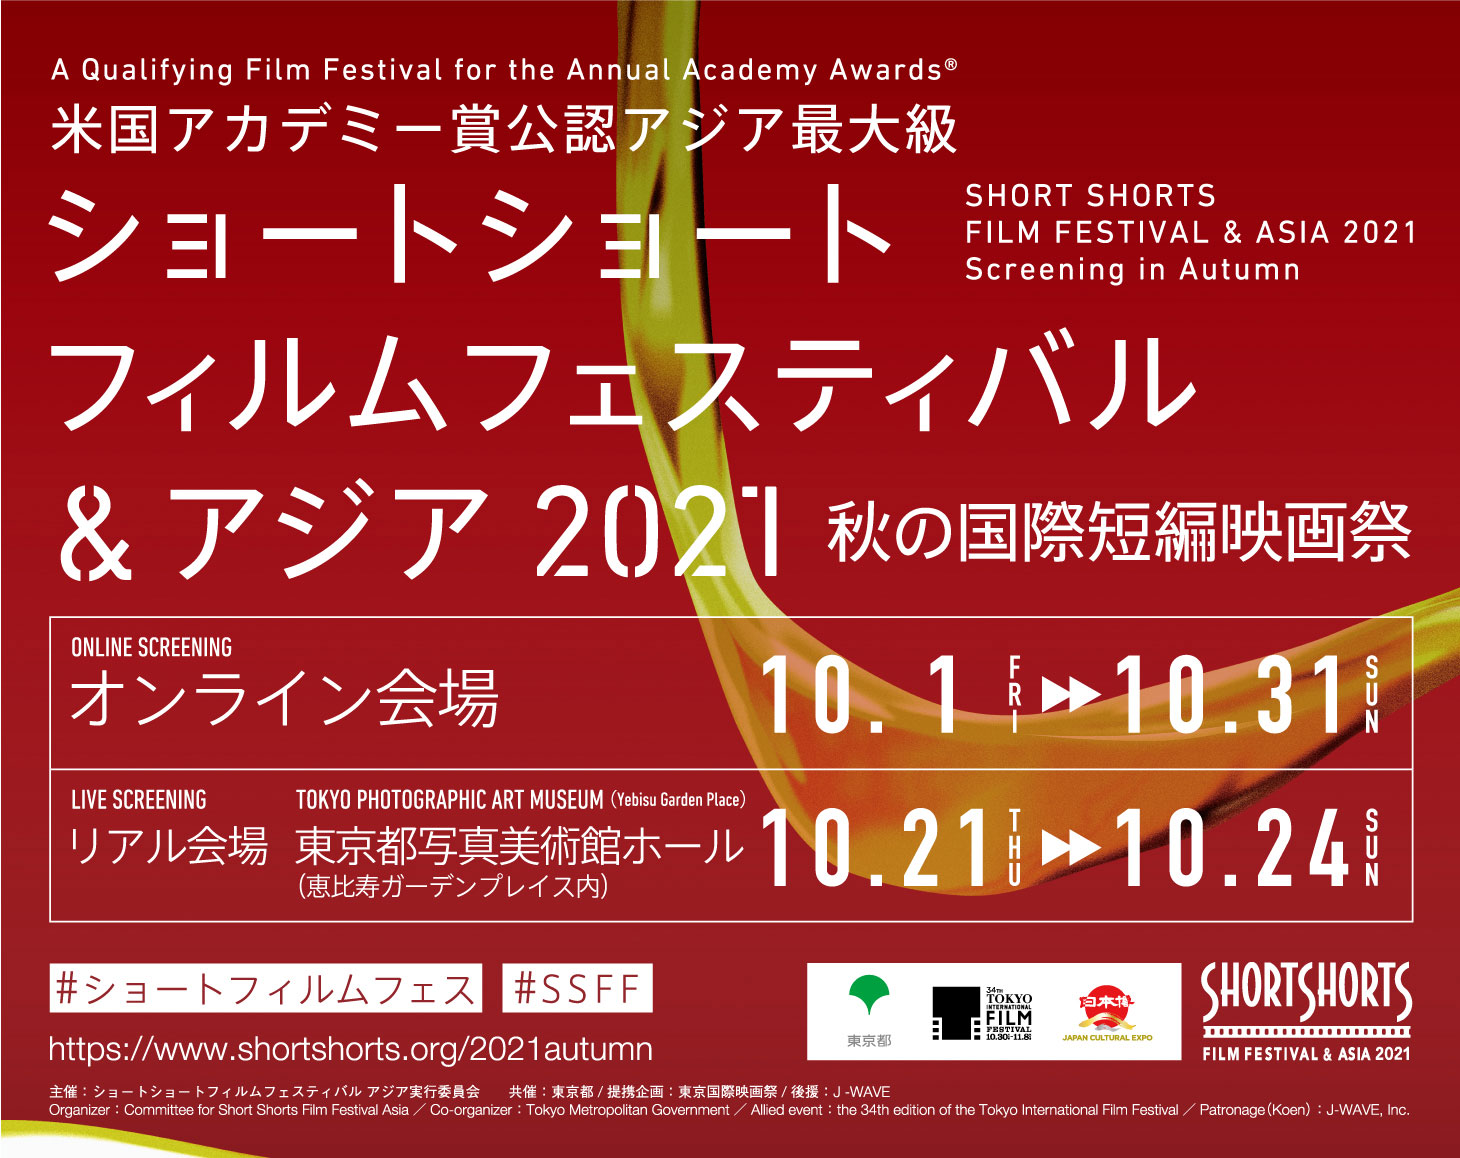 Short Shorts Film Festival and Asia will be hosting a Screening in Autumn at the Tokyo Photographic Art Museum from Oct. 21 (Thu) to Oct